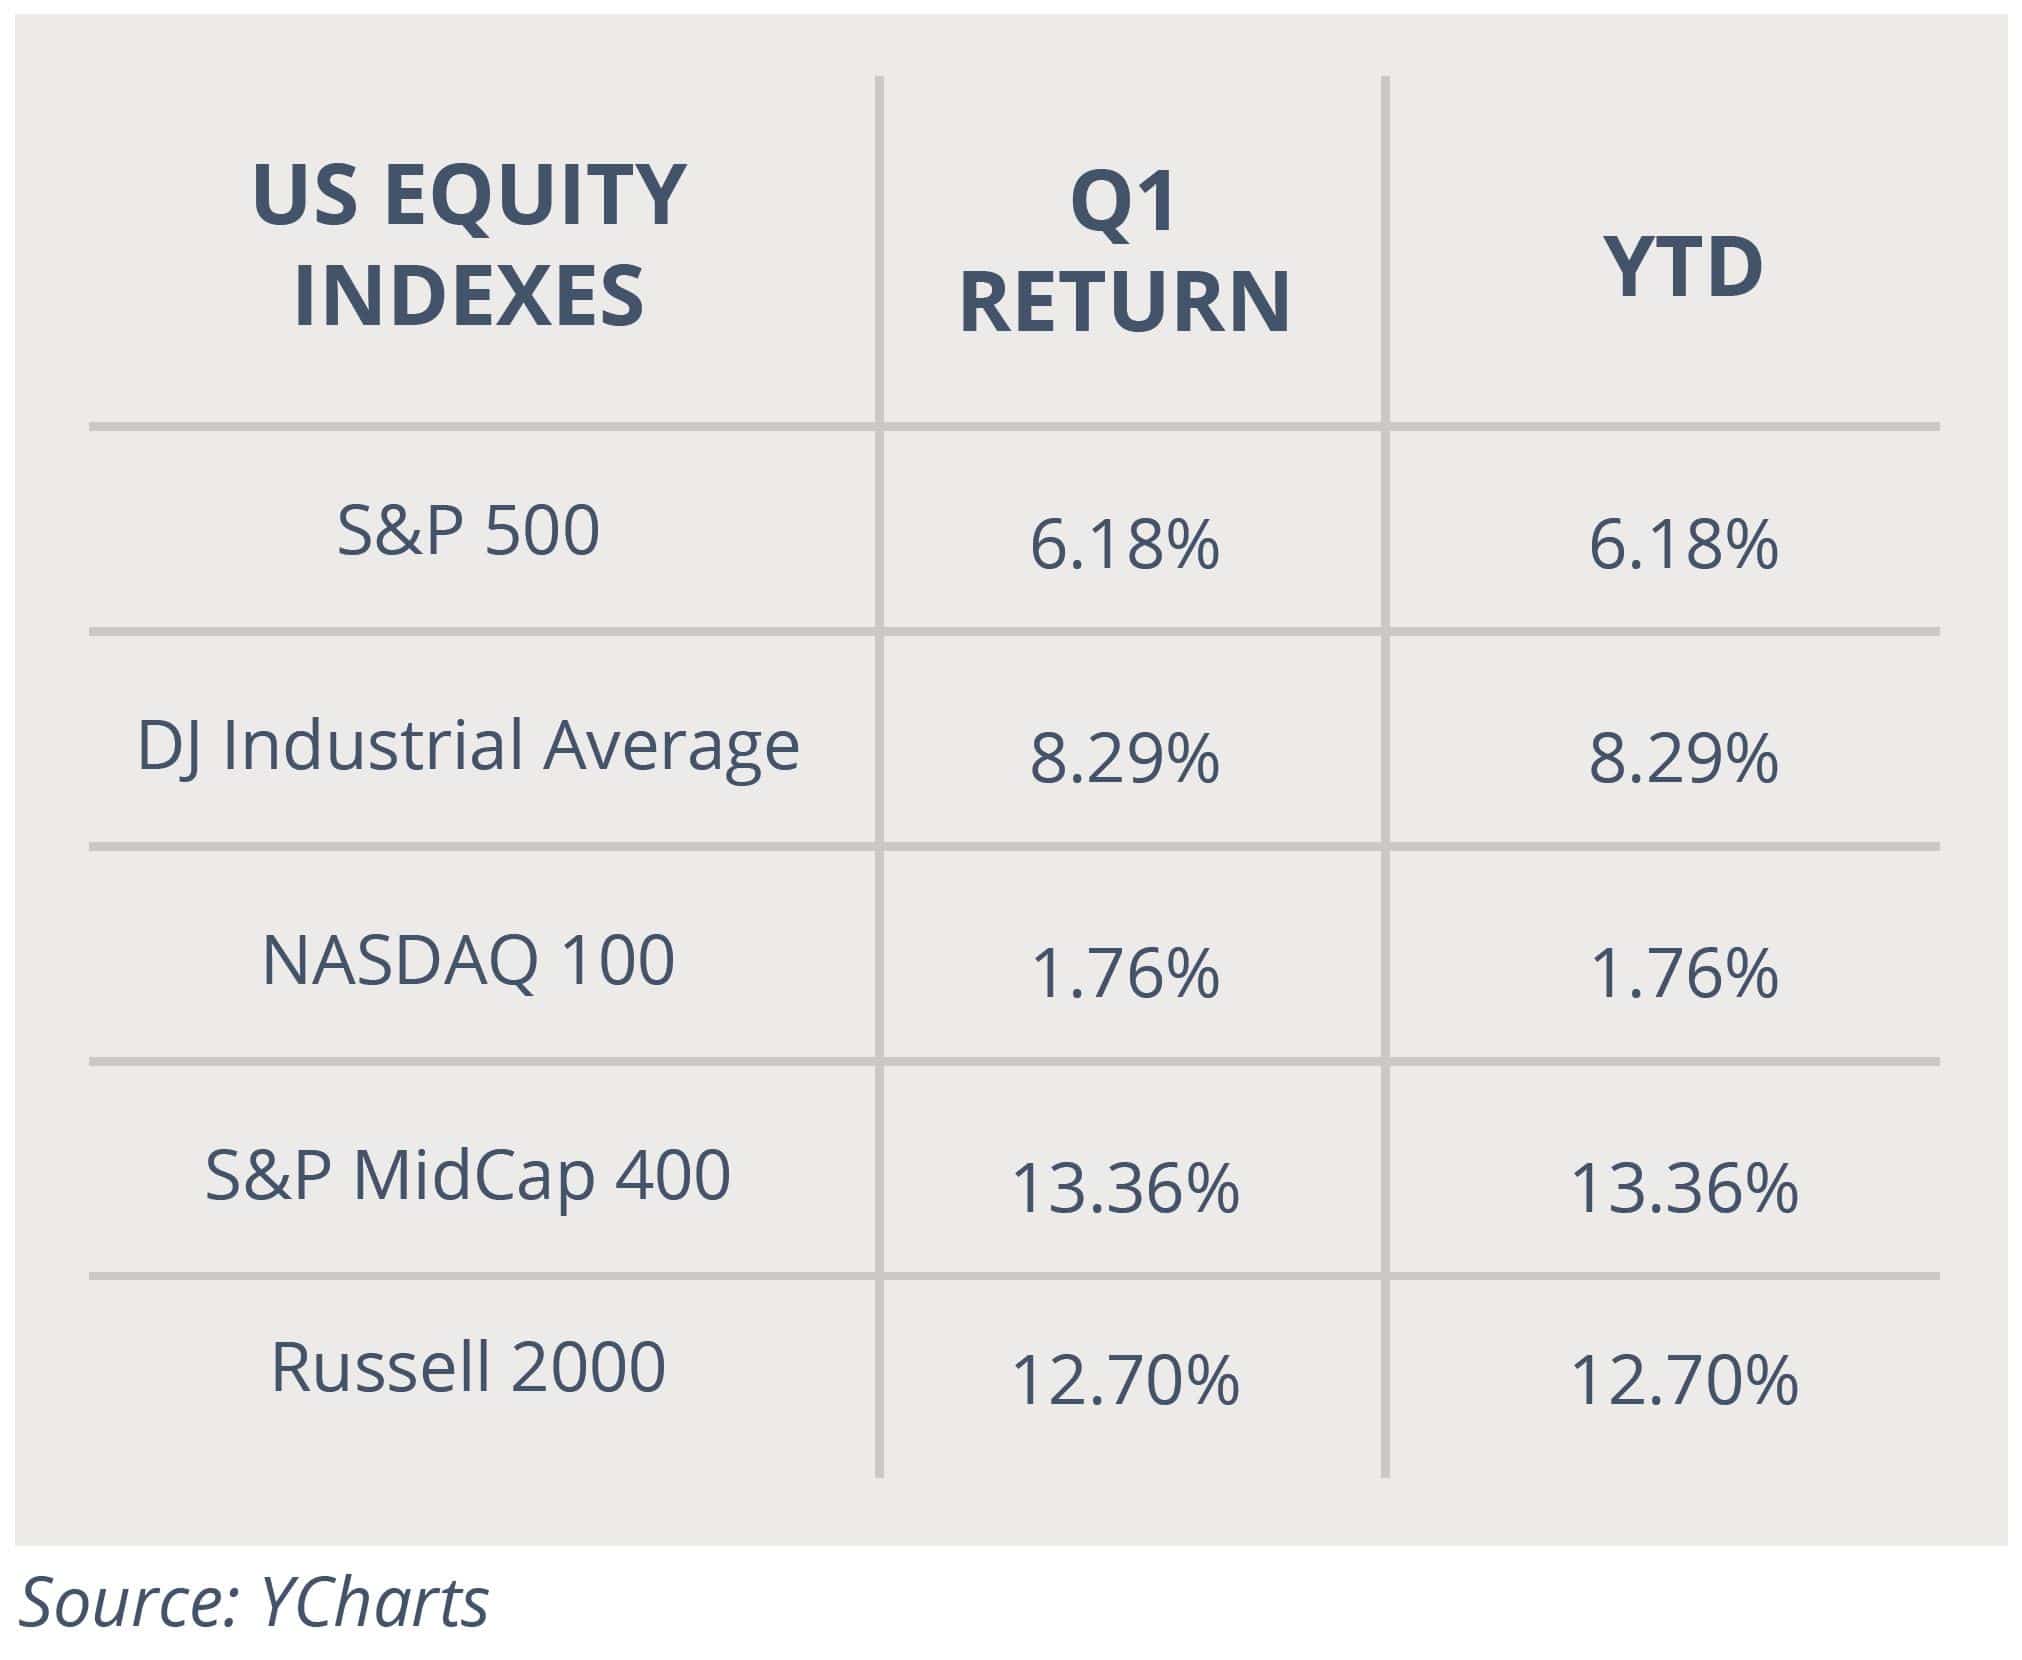 US Equity Indexes